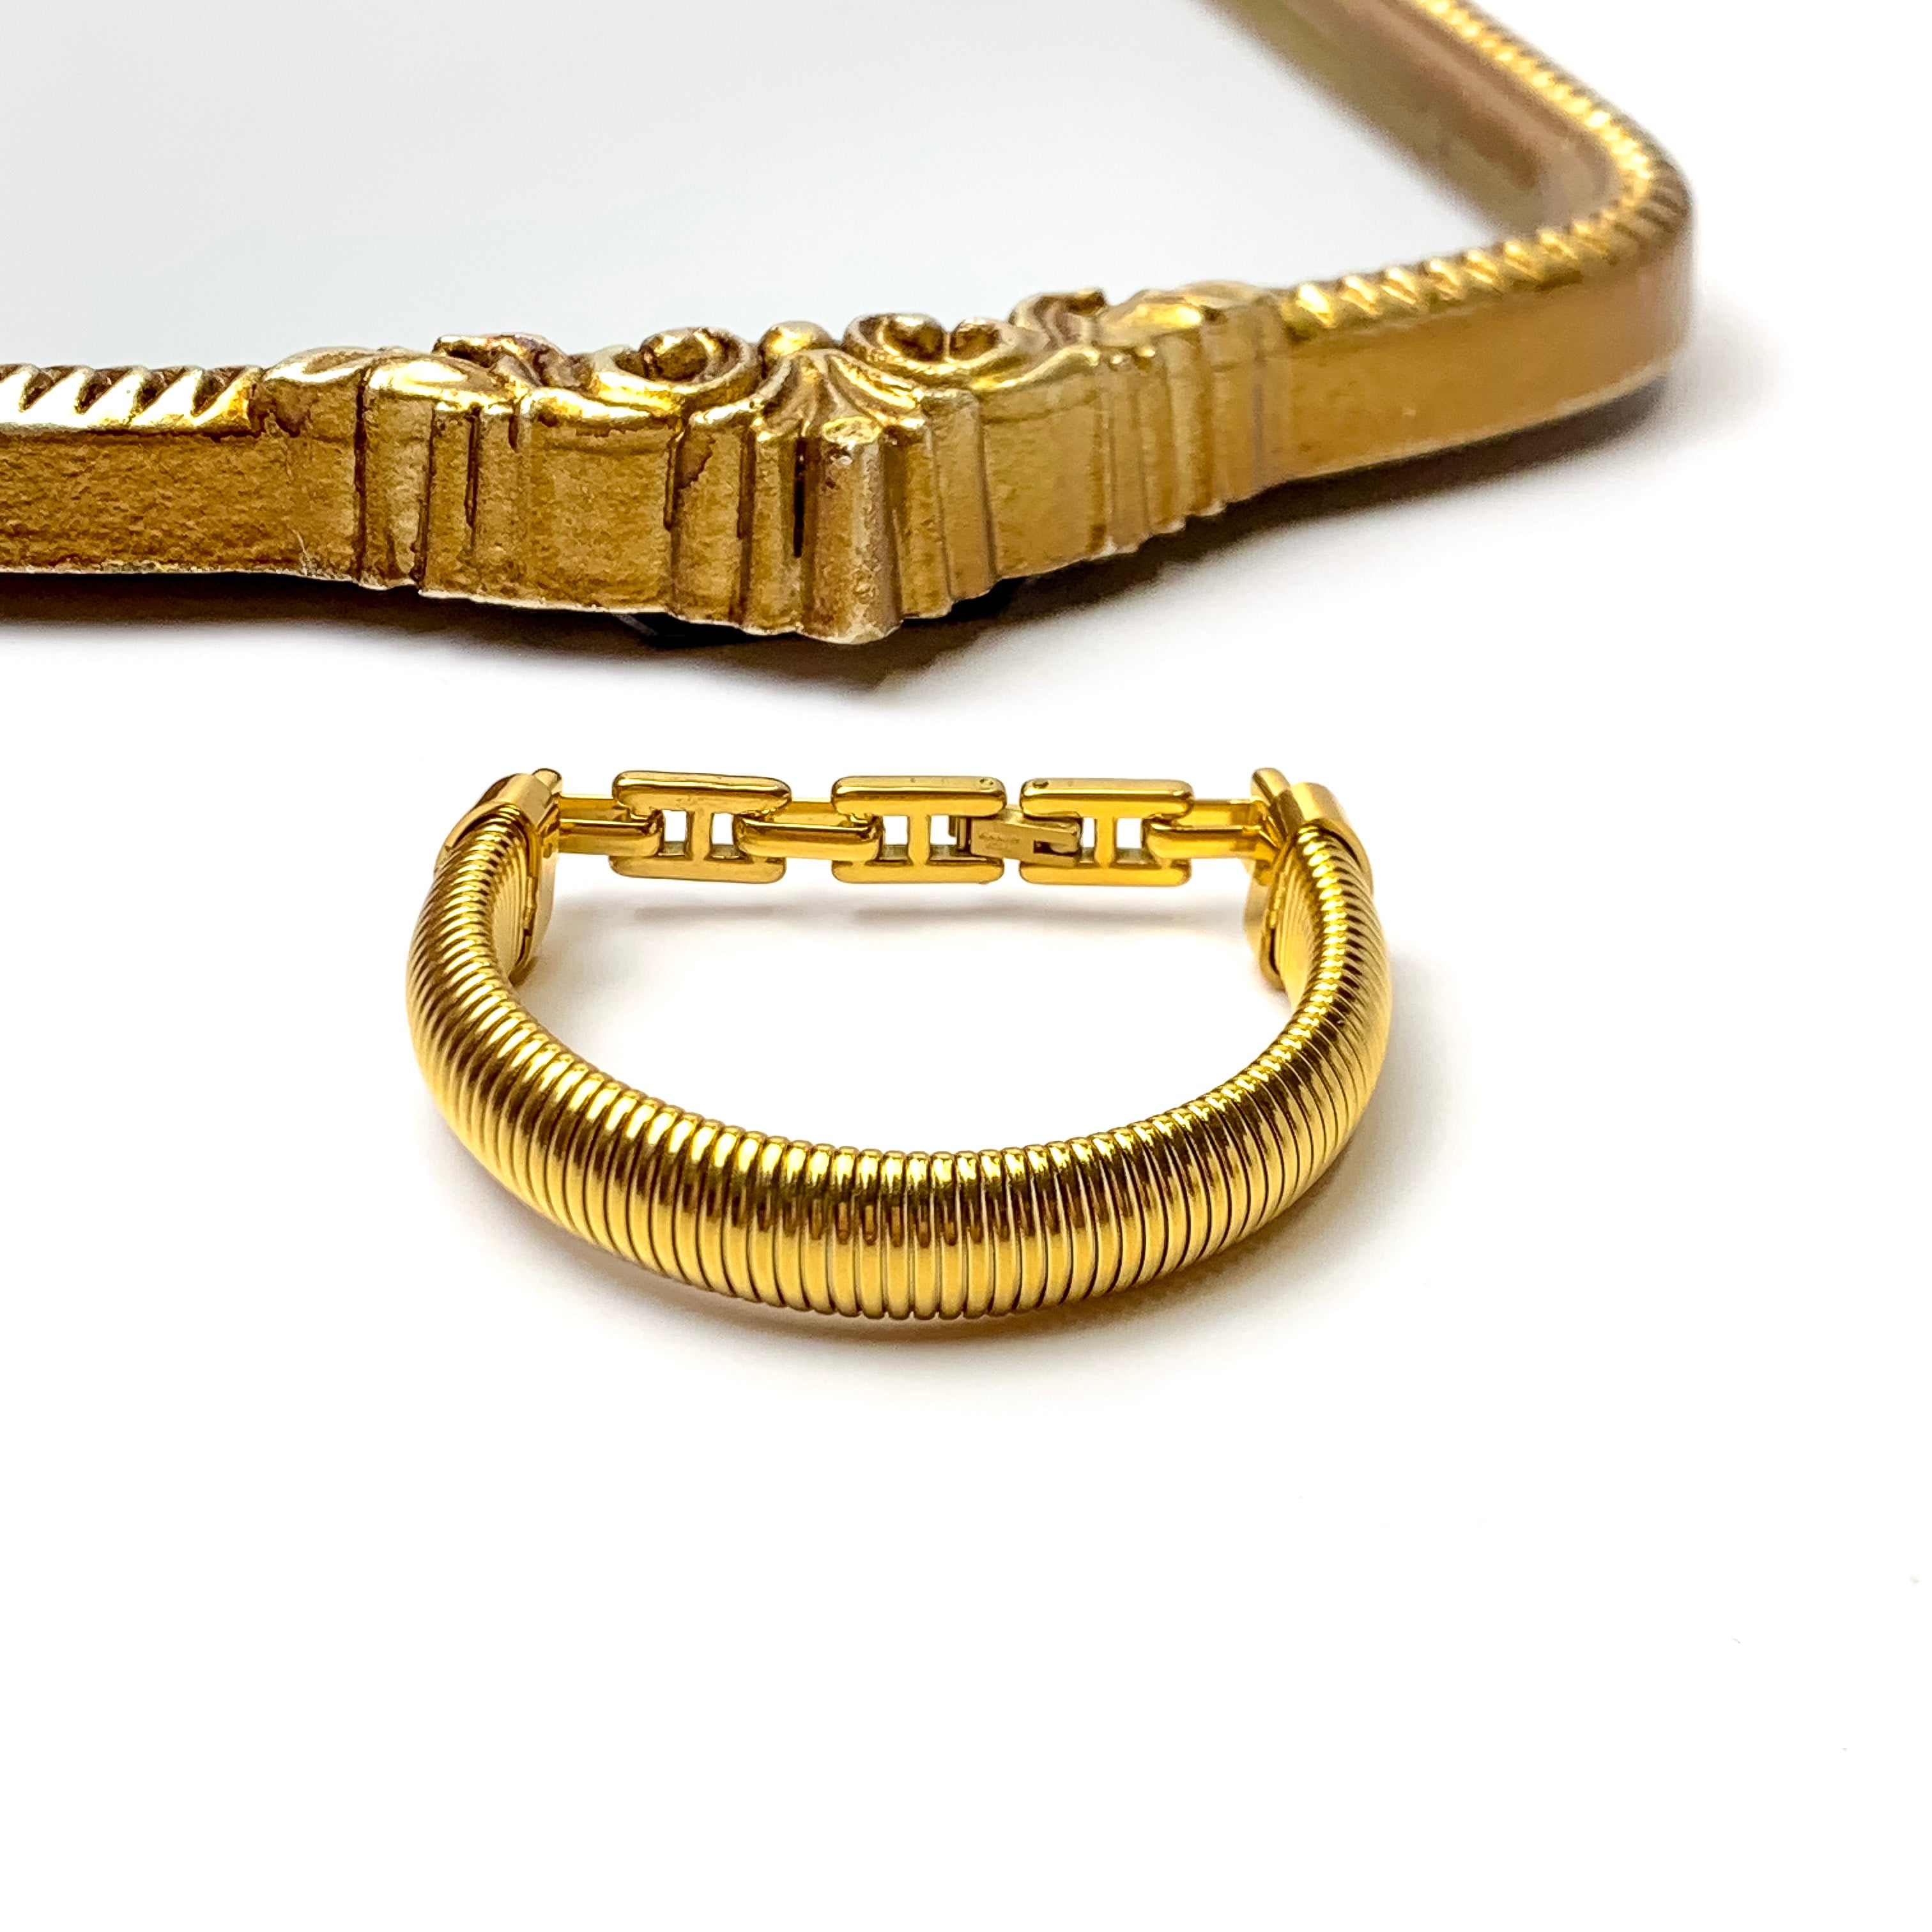 Bracha | She's Unbreakable Single Bracelet in Gold Tone - Giddy Up Glamour Boutique